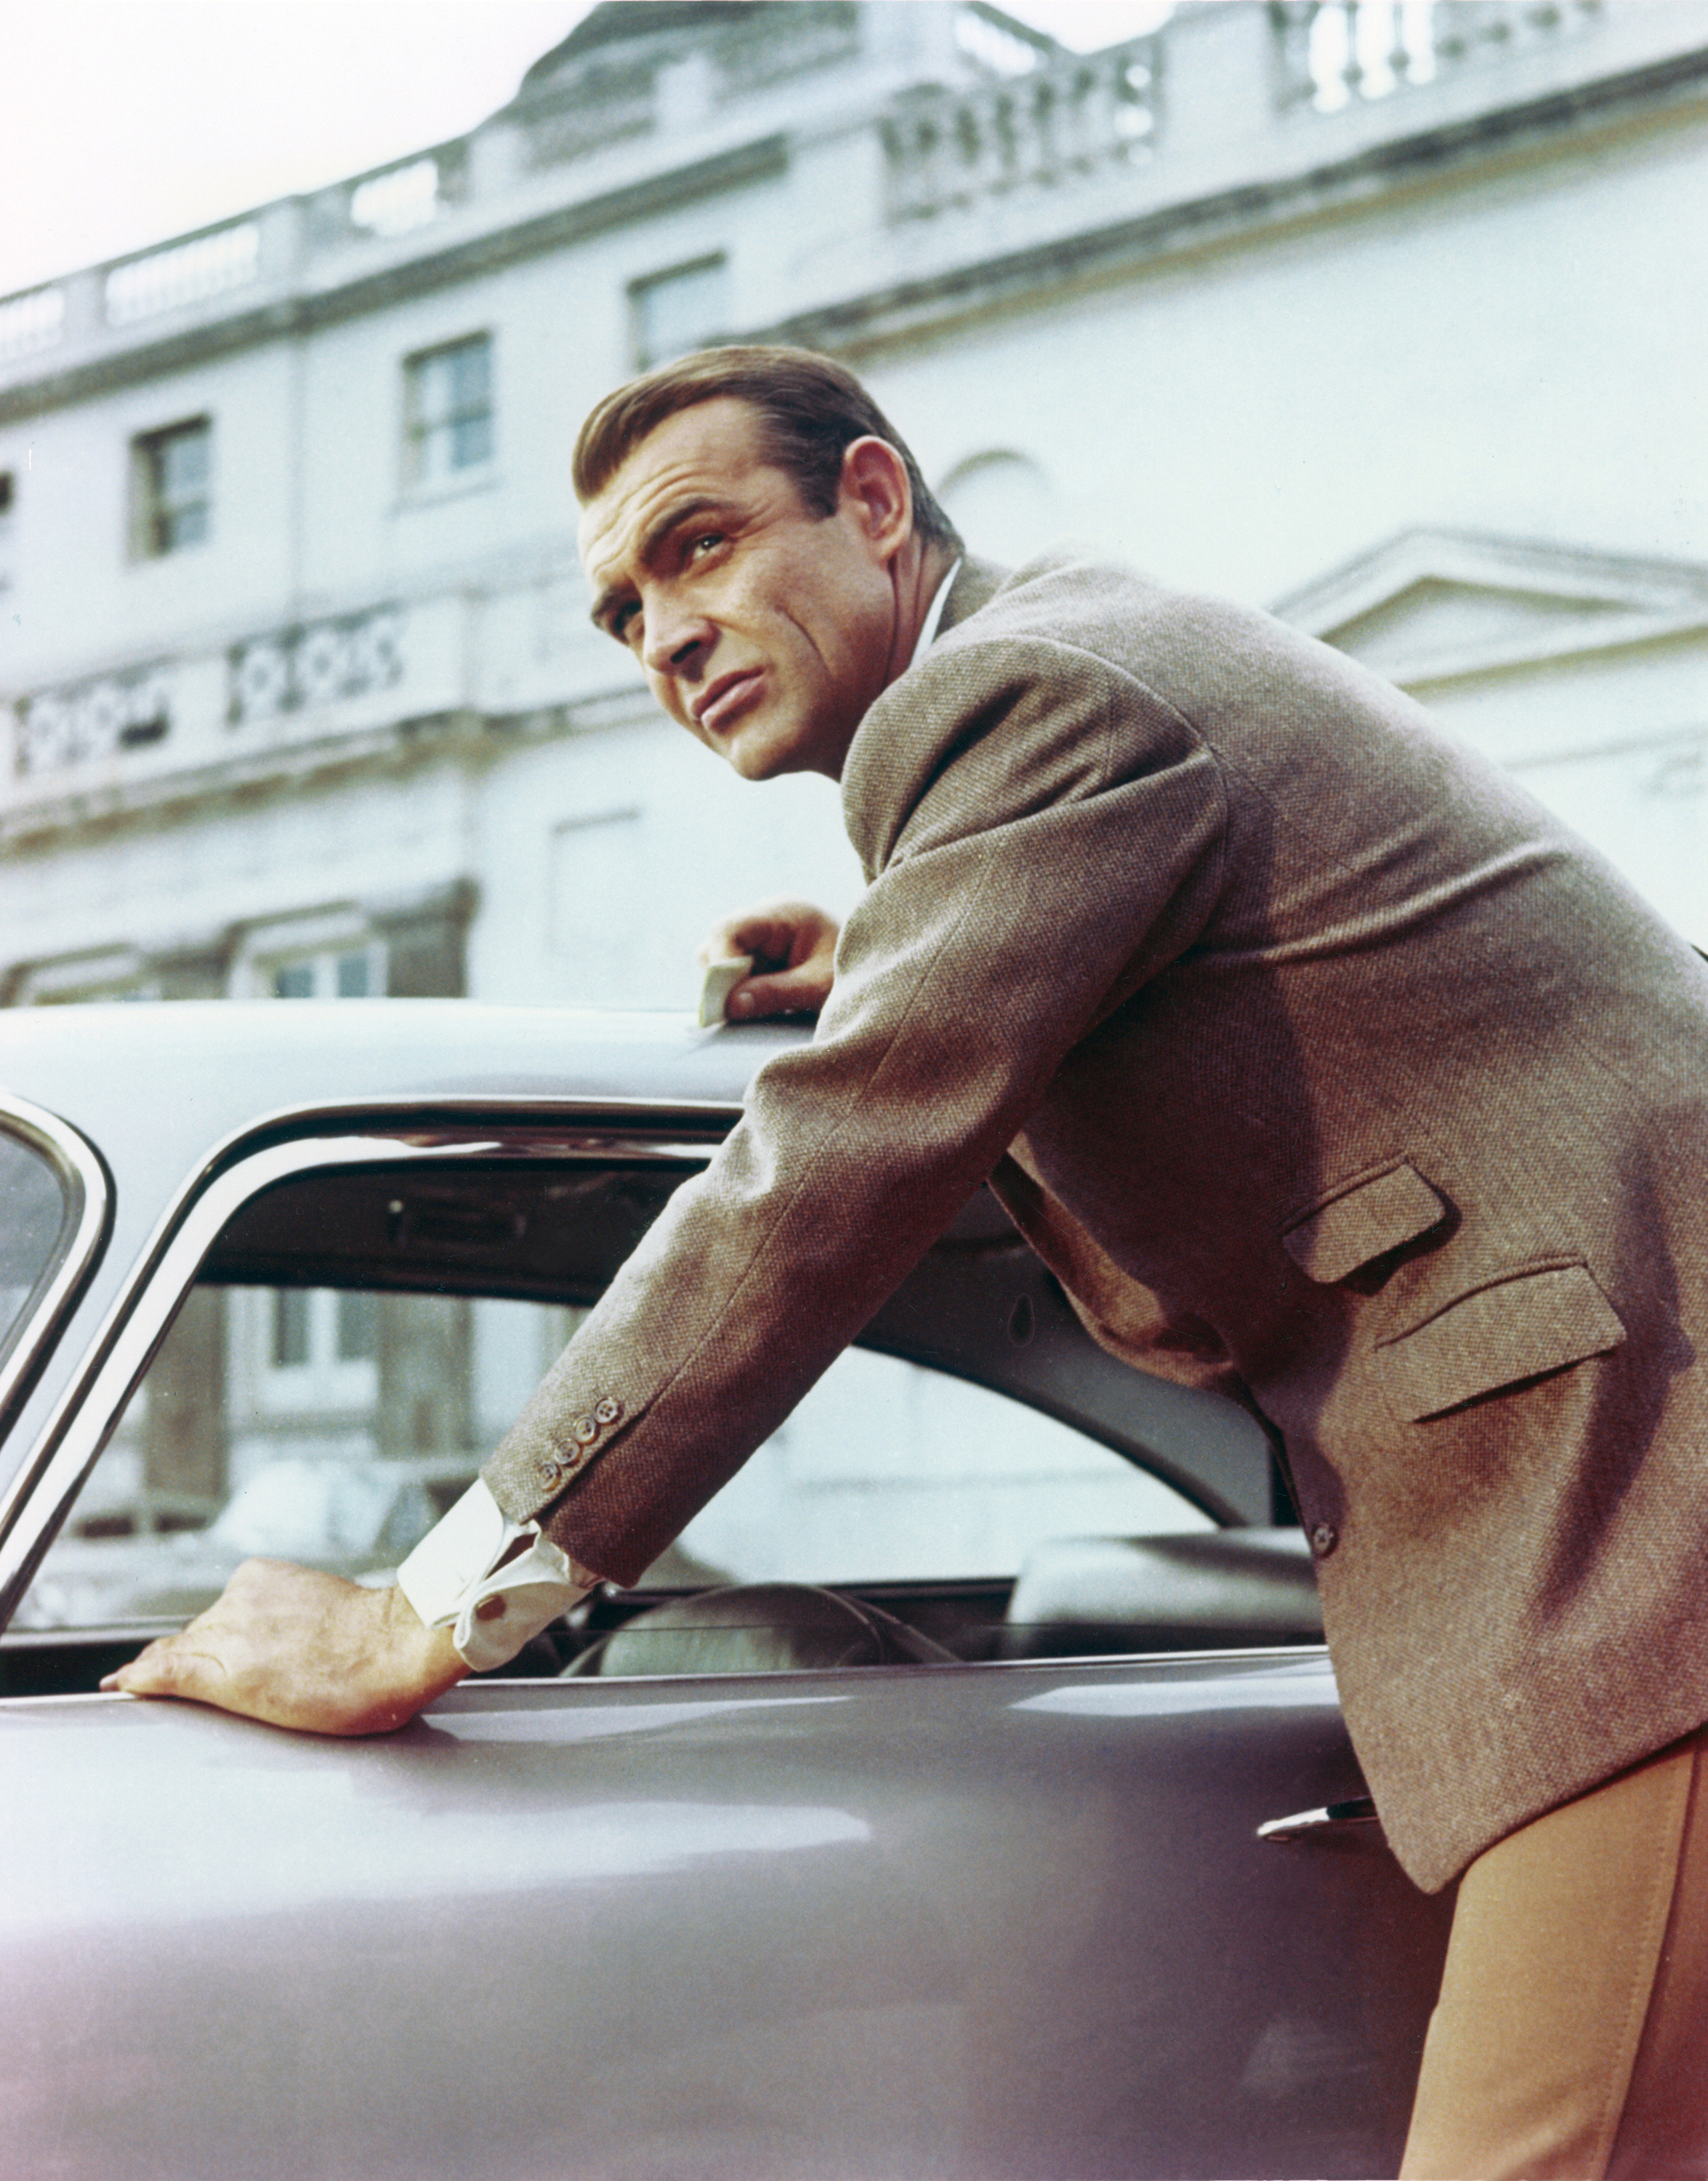 Sean Connery leaning on a car in a suit